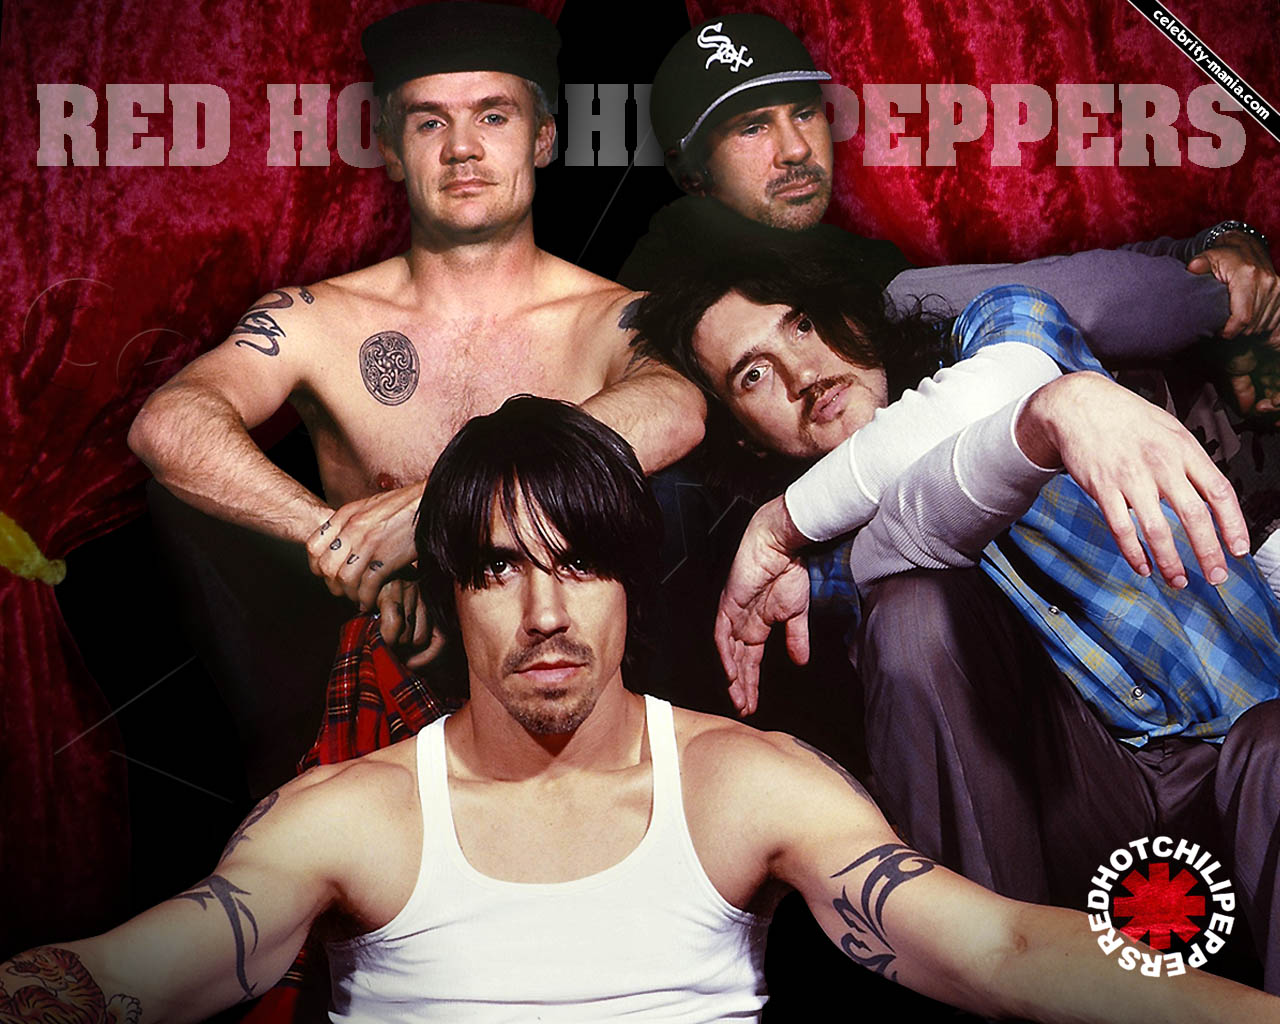 Cantinho do Rock ☮ Red Hot Chili Peppers